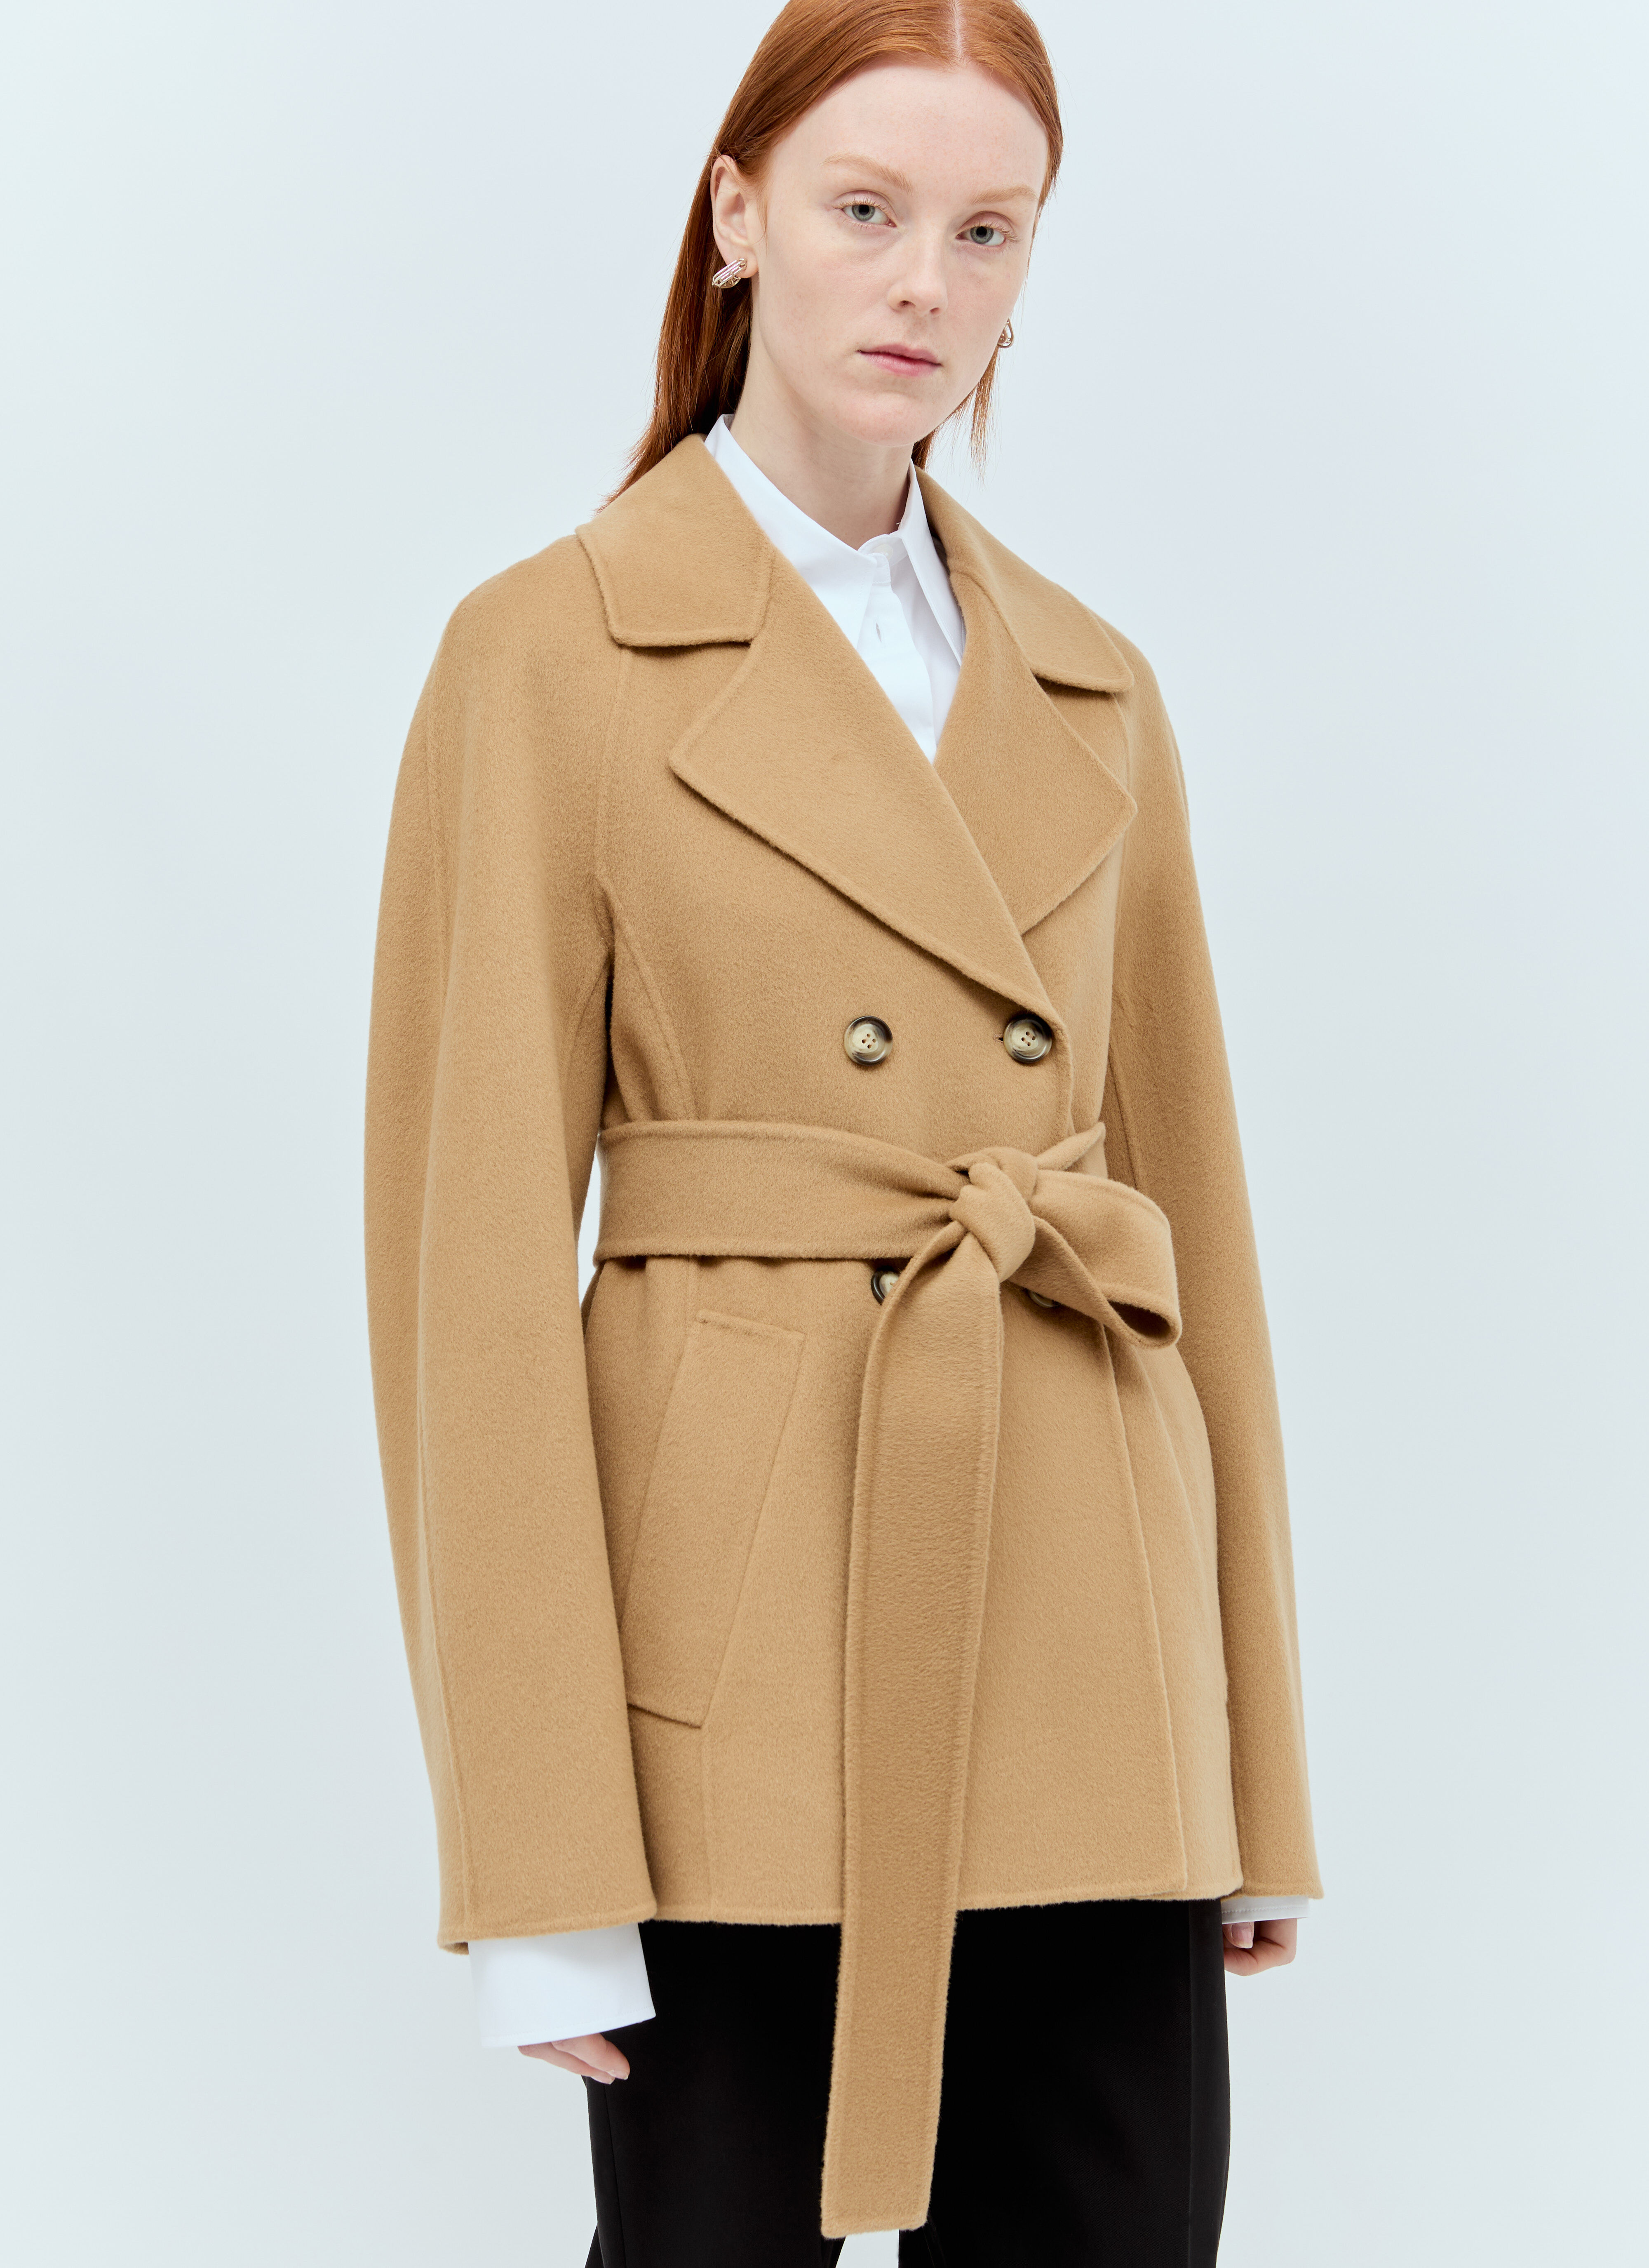 Sportmax Wool-And-Cashmere-Blend Coat White spx0256010